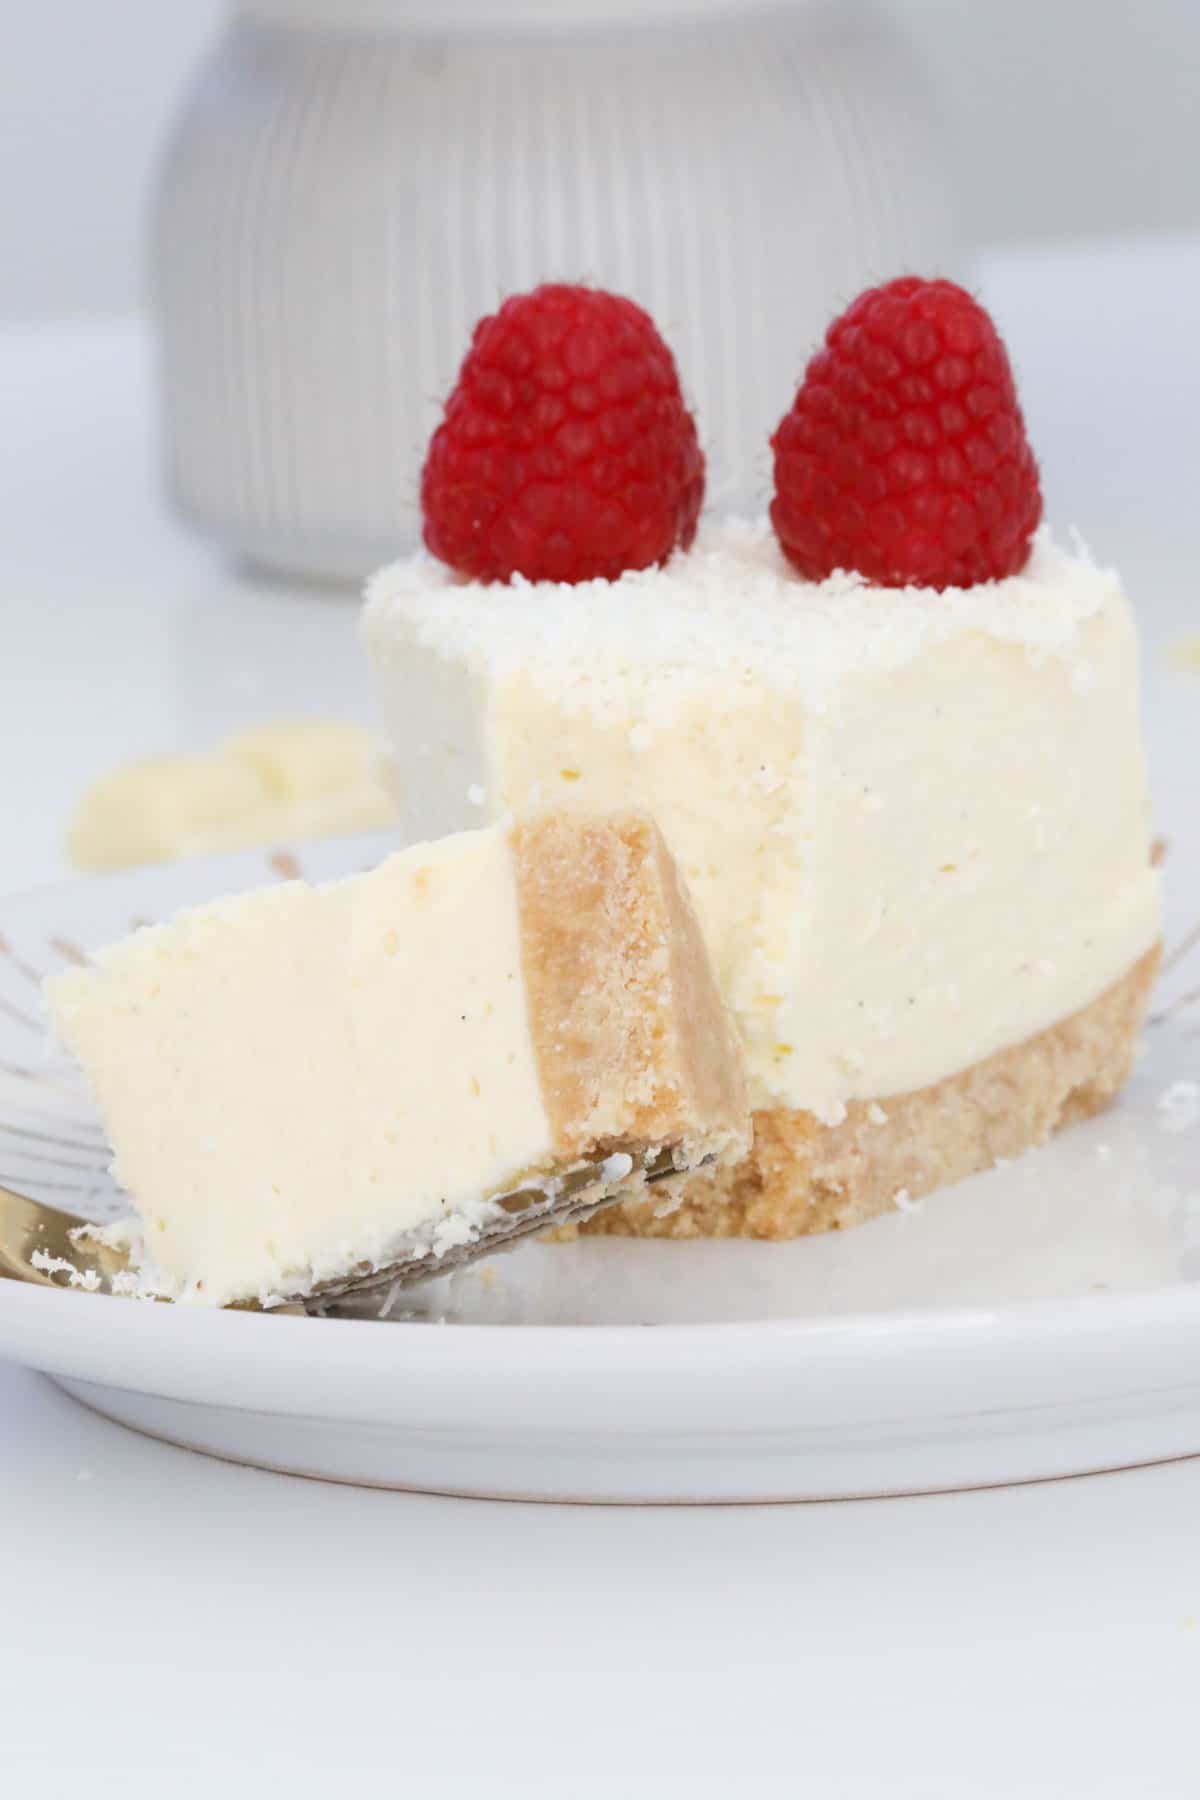 A piece of cheesecake on a plate with a bite-sized piece on a fork.